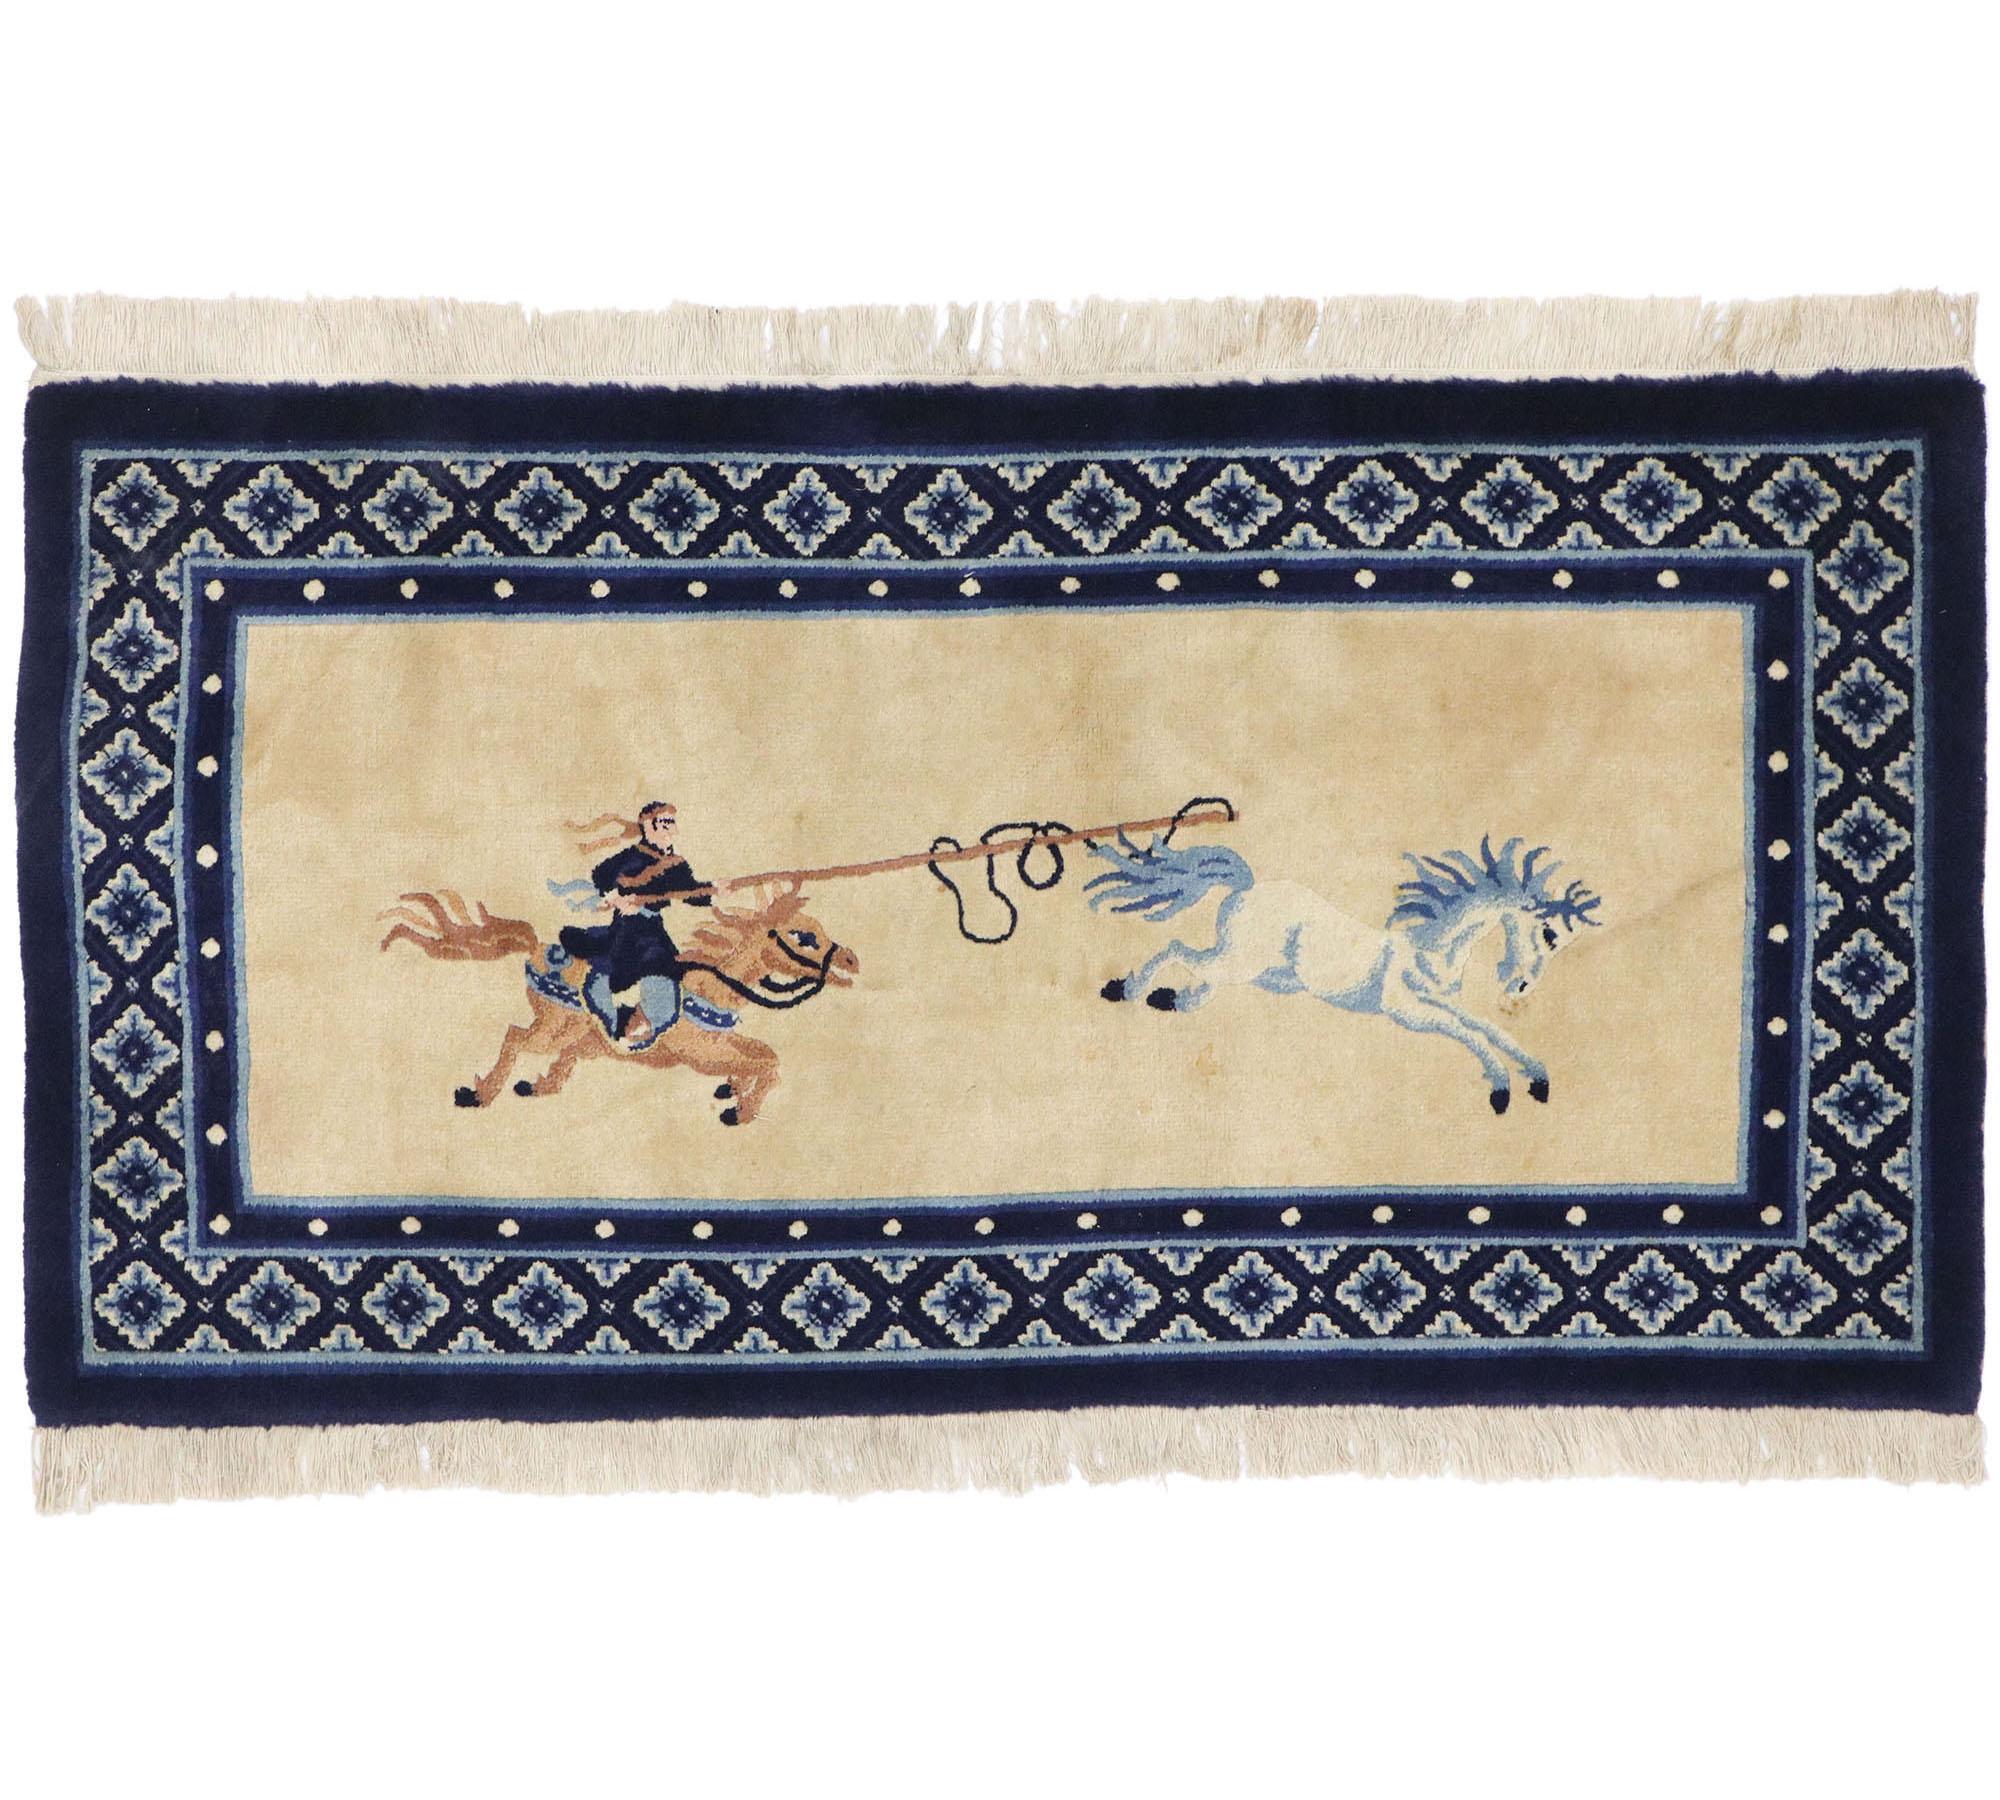 Antique Chinese Art Deco Pictorial Rug with Samurai and Wild Horse For Sale 1